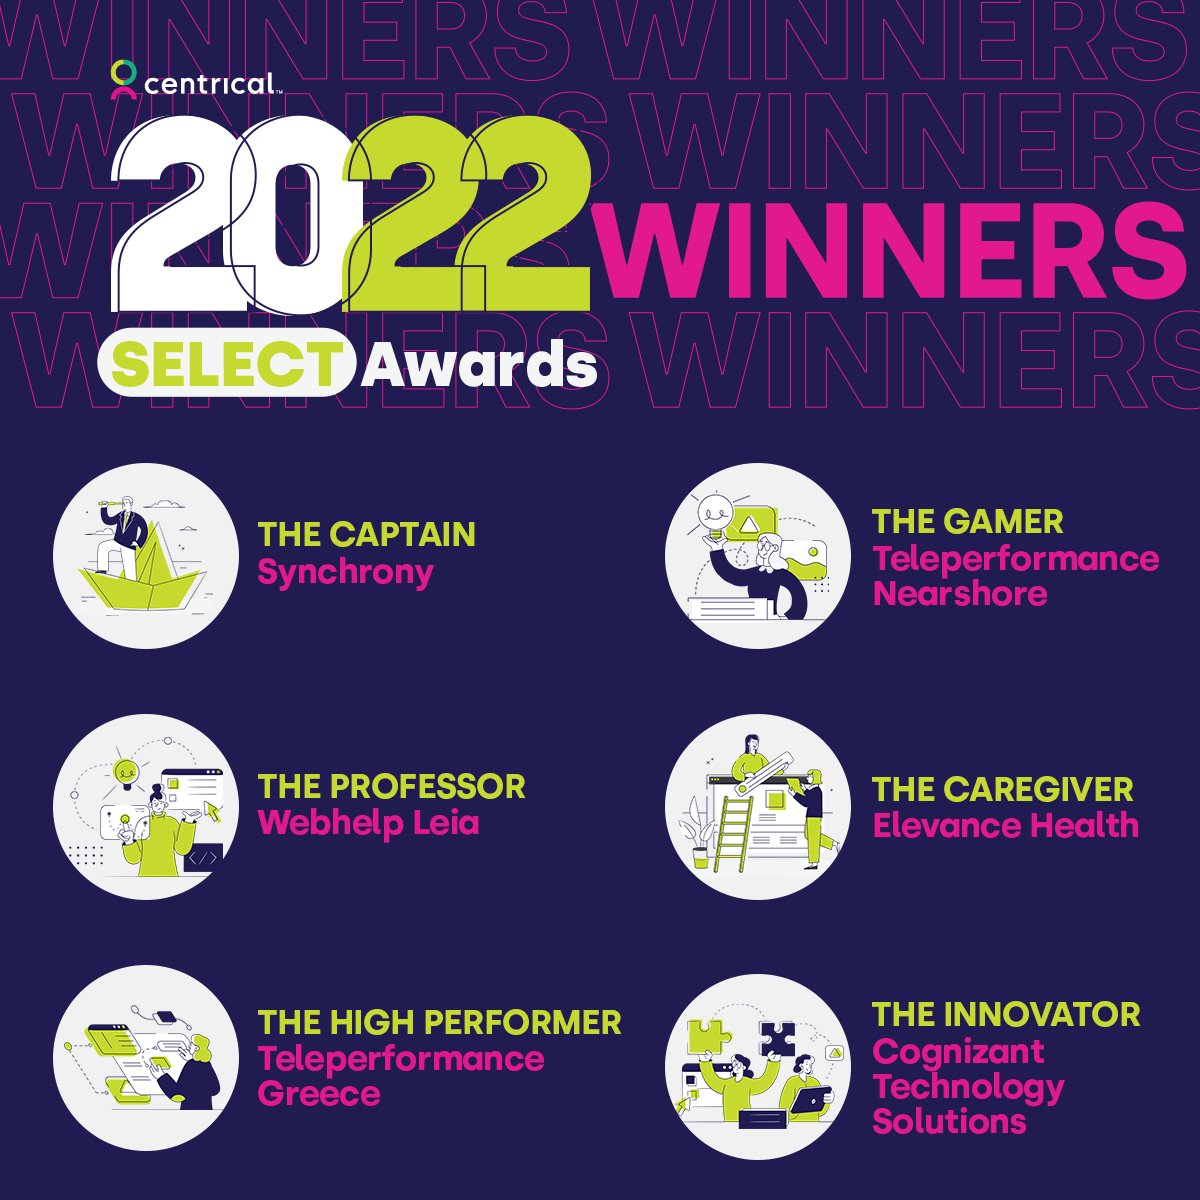 🎉 Congratulations to our 2022 Customer Select Award Winners! 🎉 Check out the awards ceremony on demand! ⤵ lnkd.in/dVrPztPw